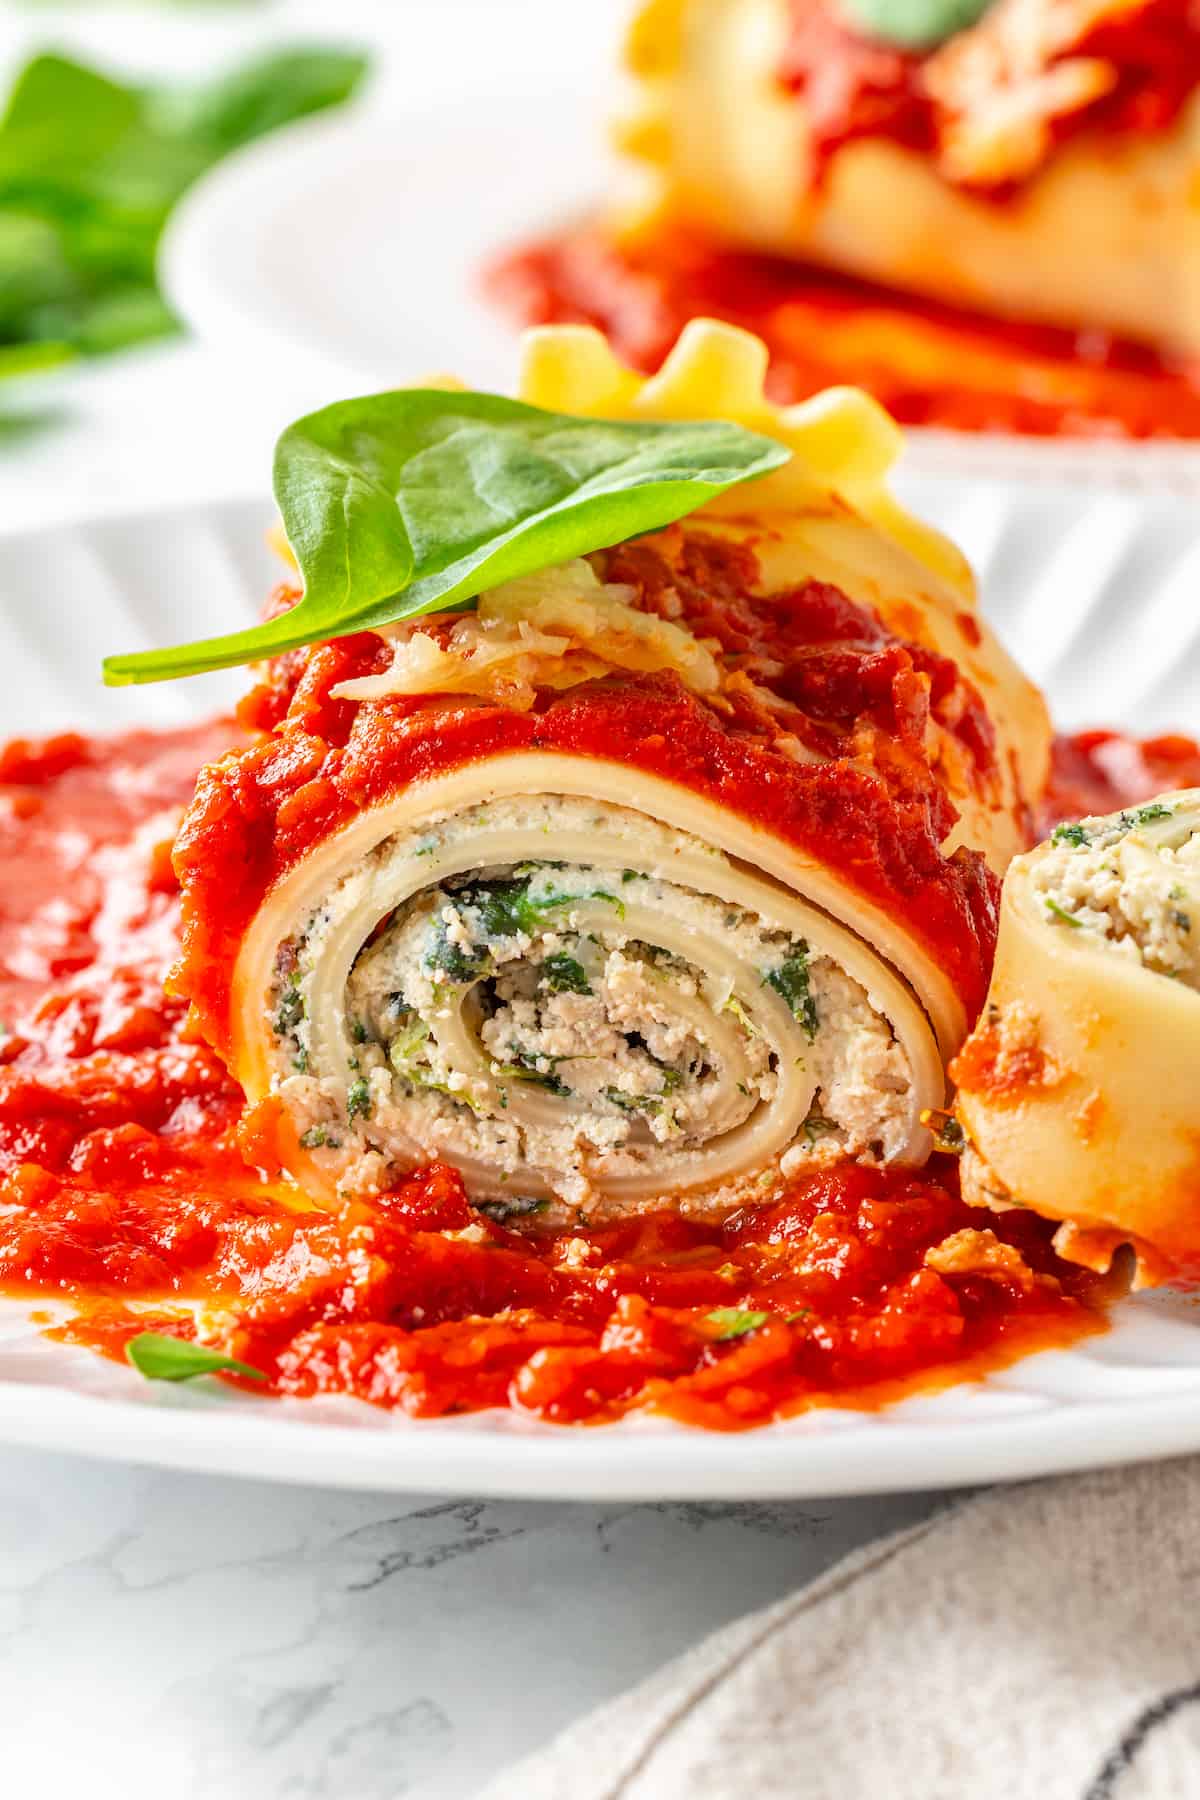 Closeup of vegan lasagna roll on plate topped with basil leaf